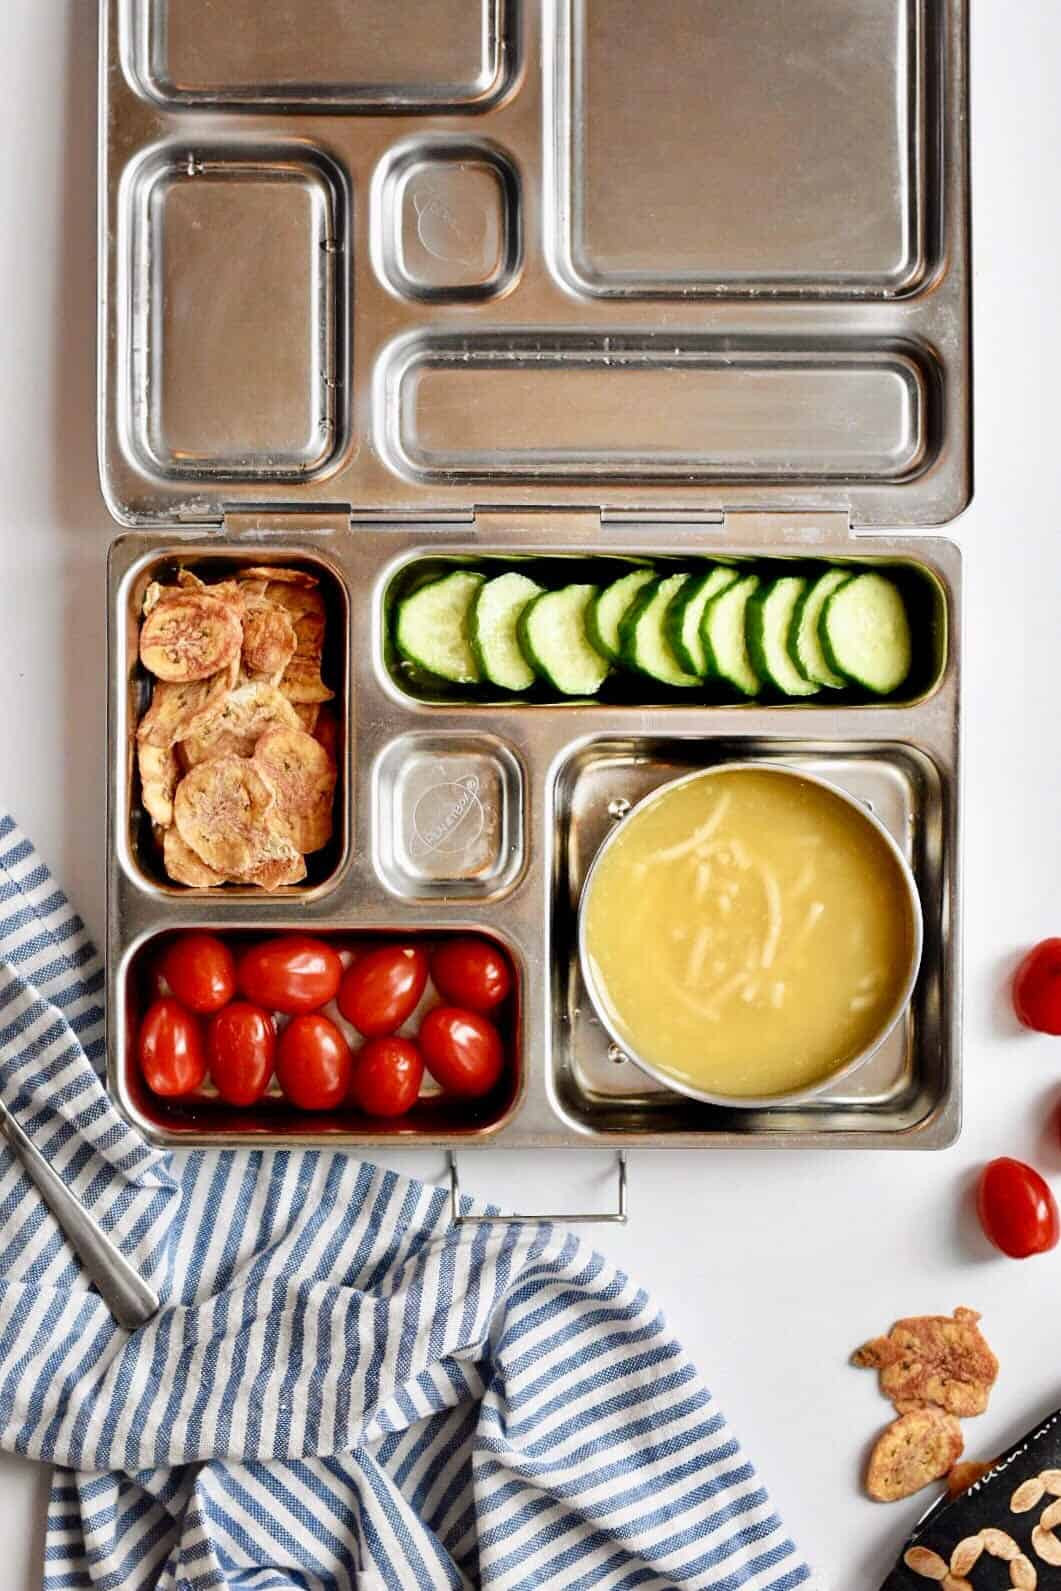 Healthy Kid Lunches
 3 Healthy Kid Lunch Box Ideas